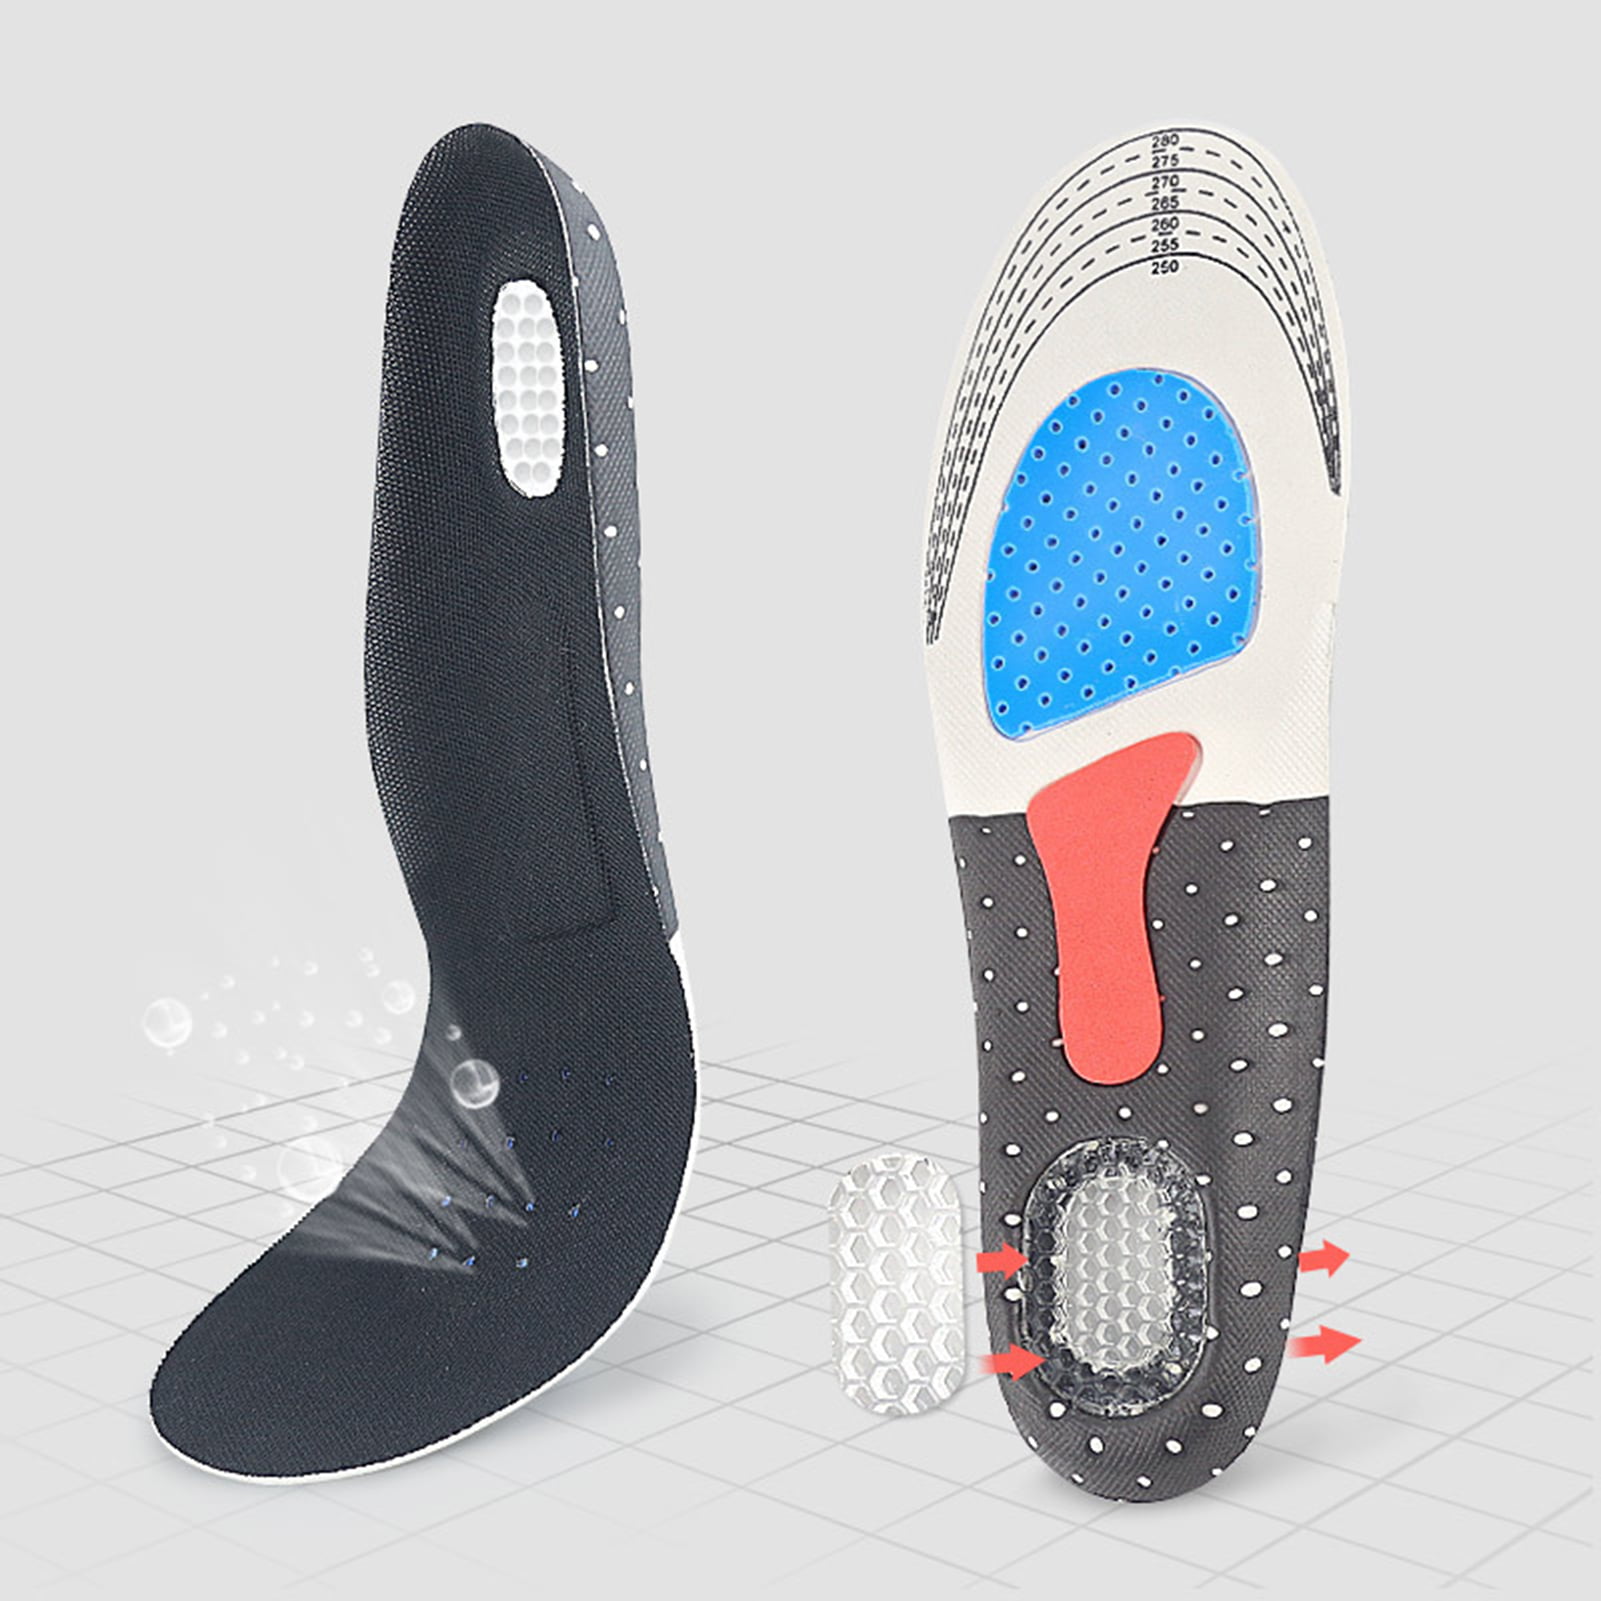 Details about   Men's Gel Orthotic Sport Running Insoles Insert Shoe Pad Arch Support Cushion do 